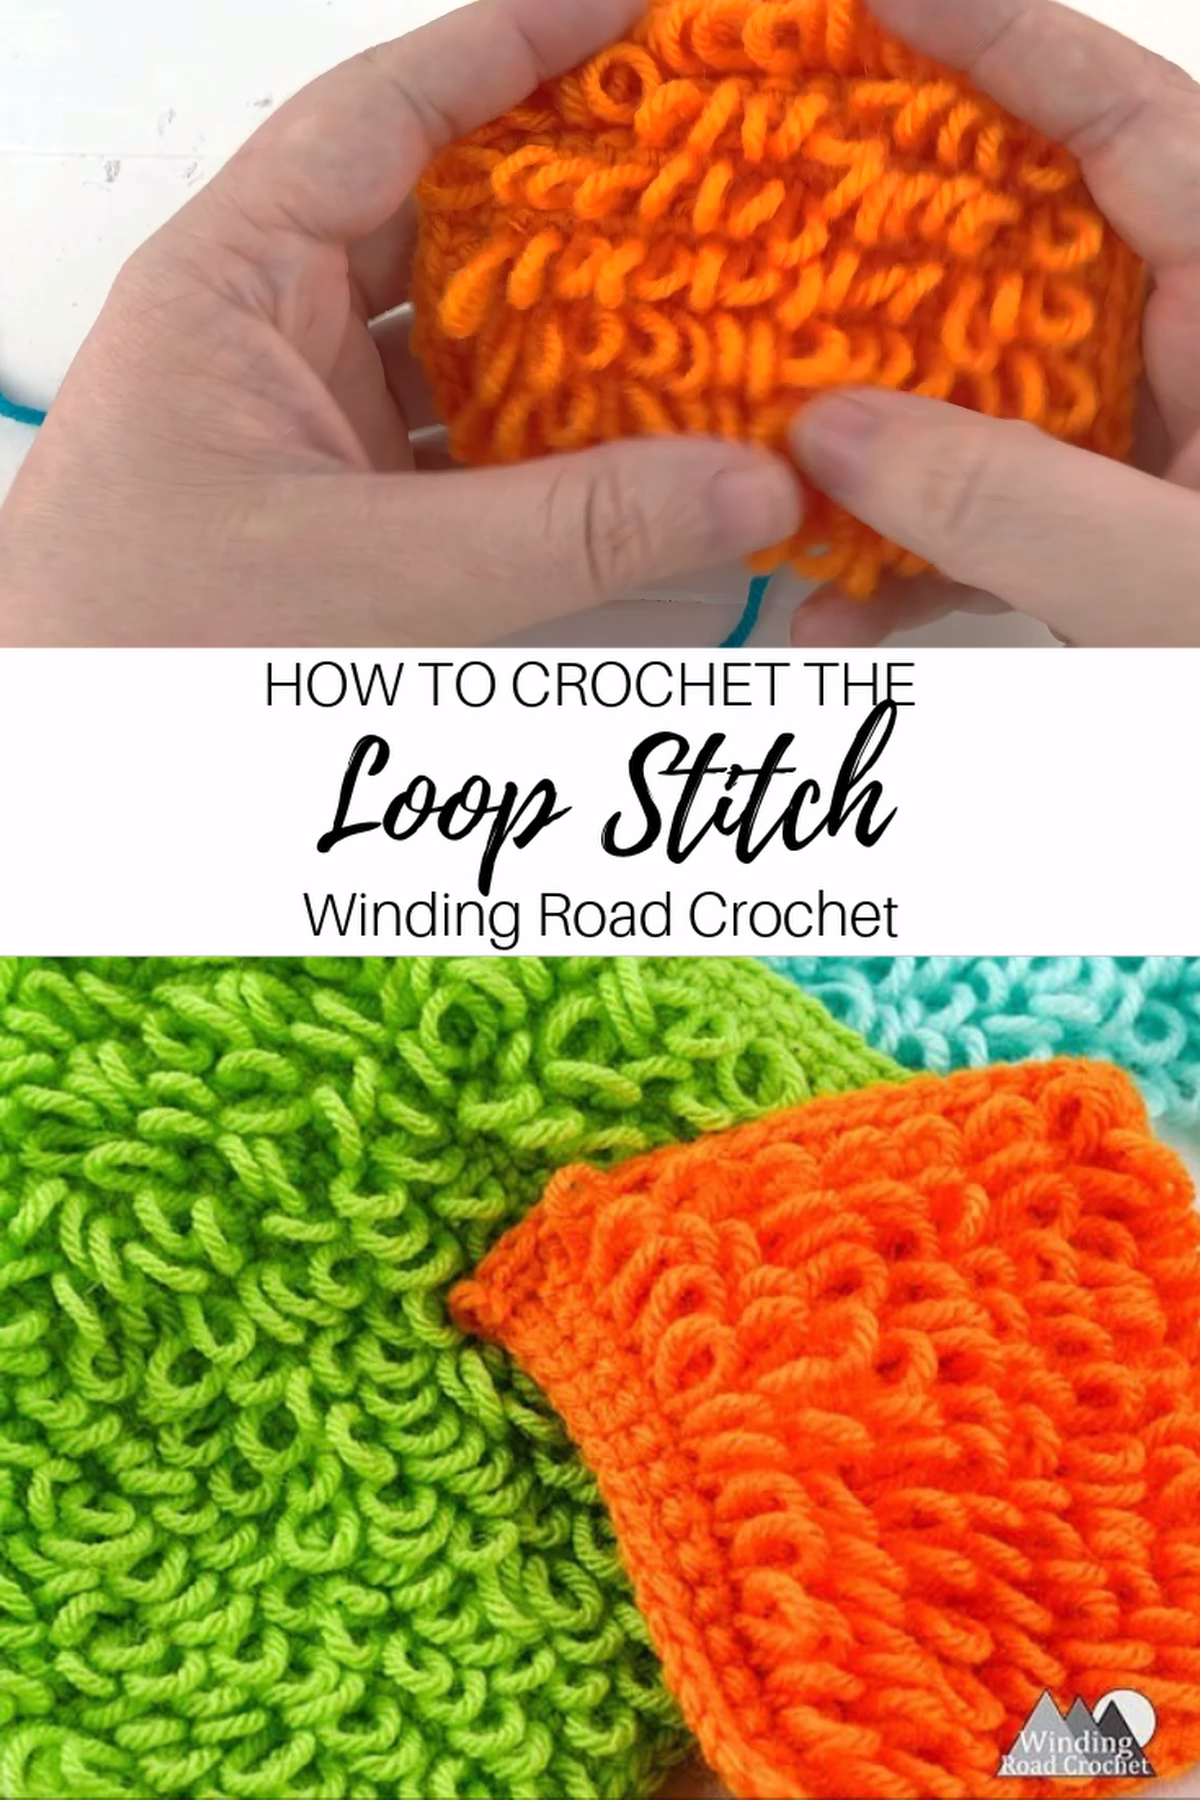 Crochet Loop Stitch Video Tutorial by Winding Road Crochet -   19 knitting and crochet Learning patterns ideas